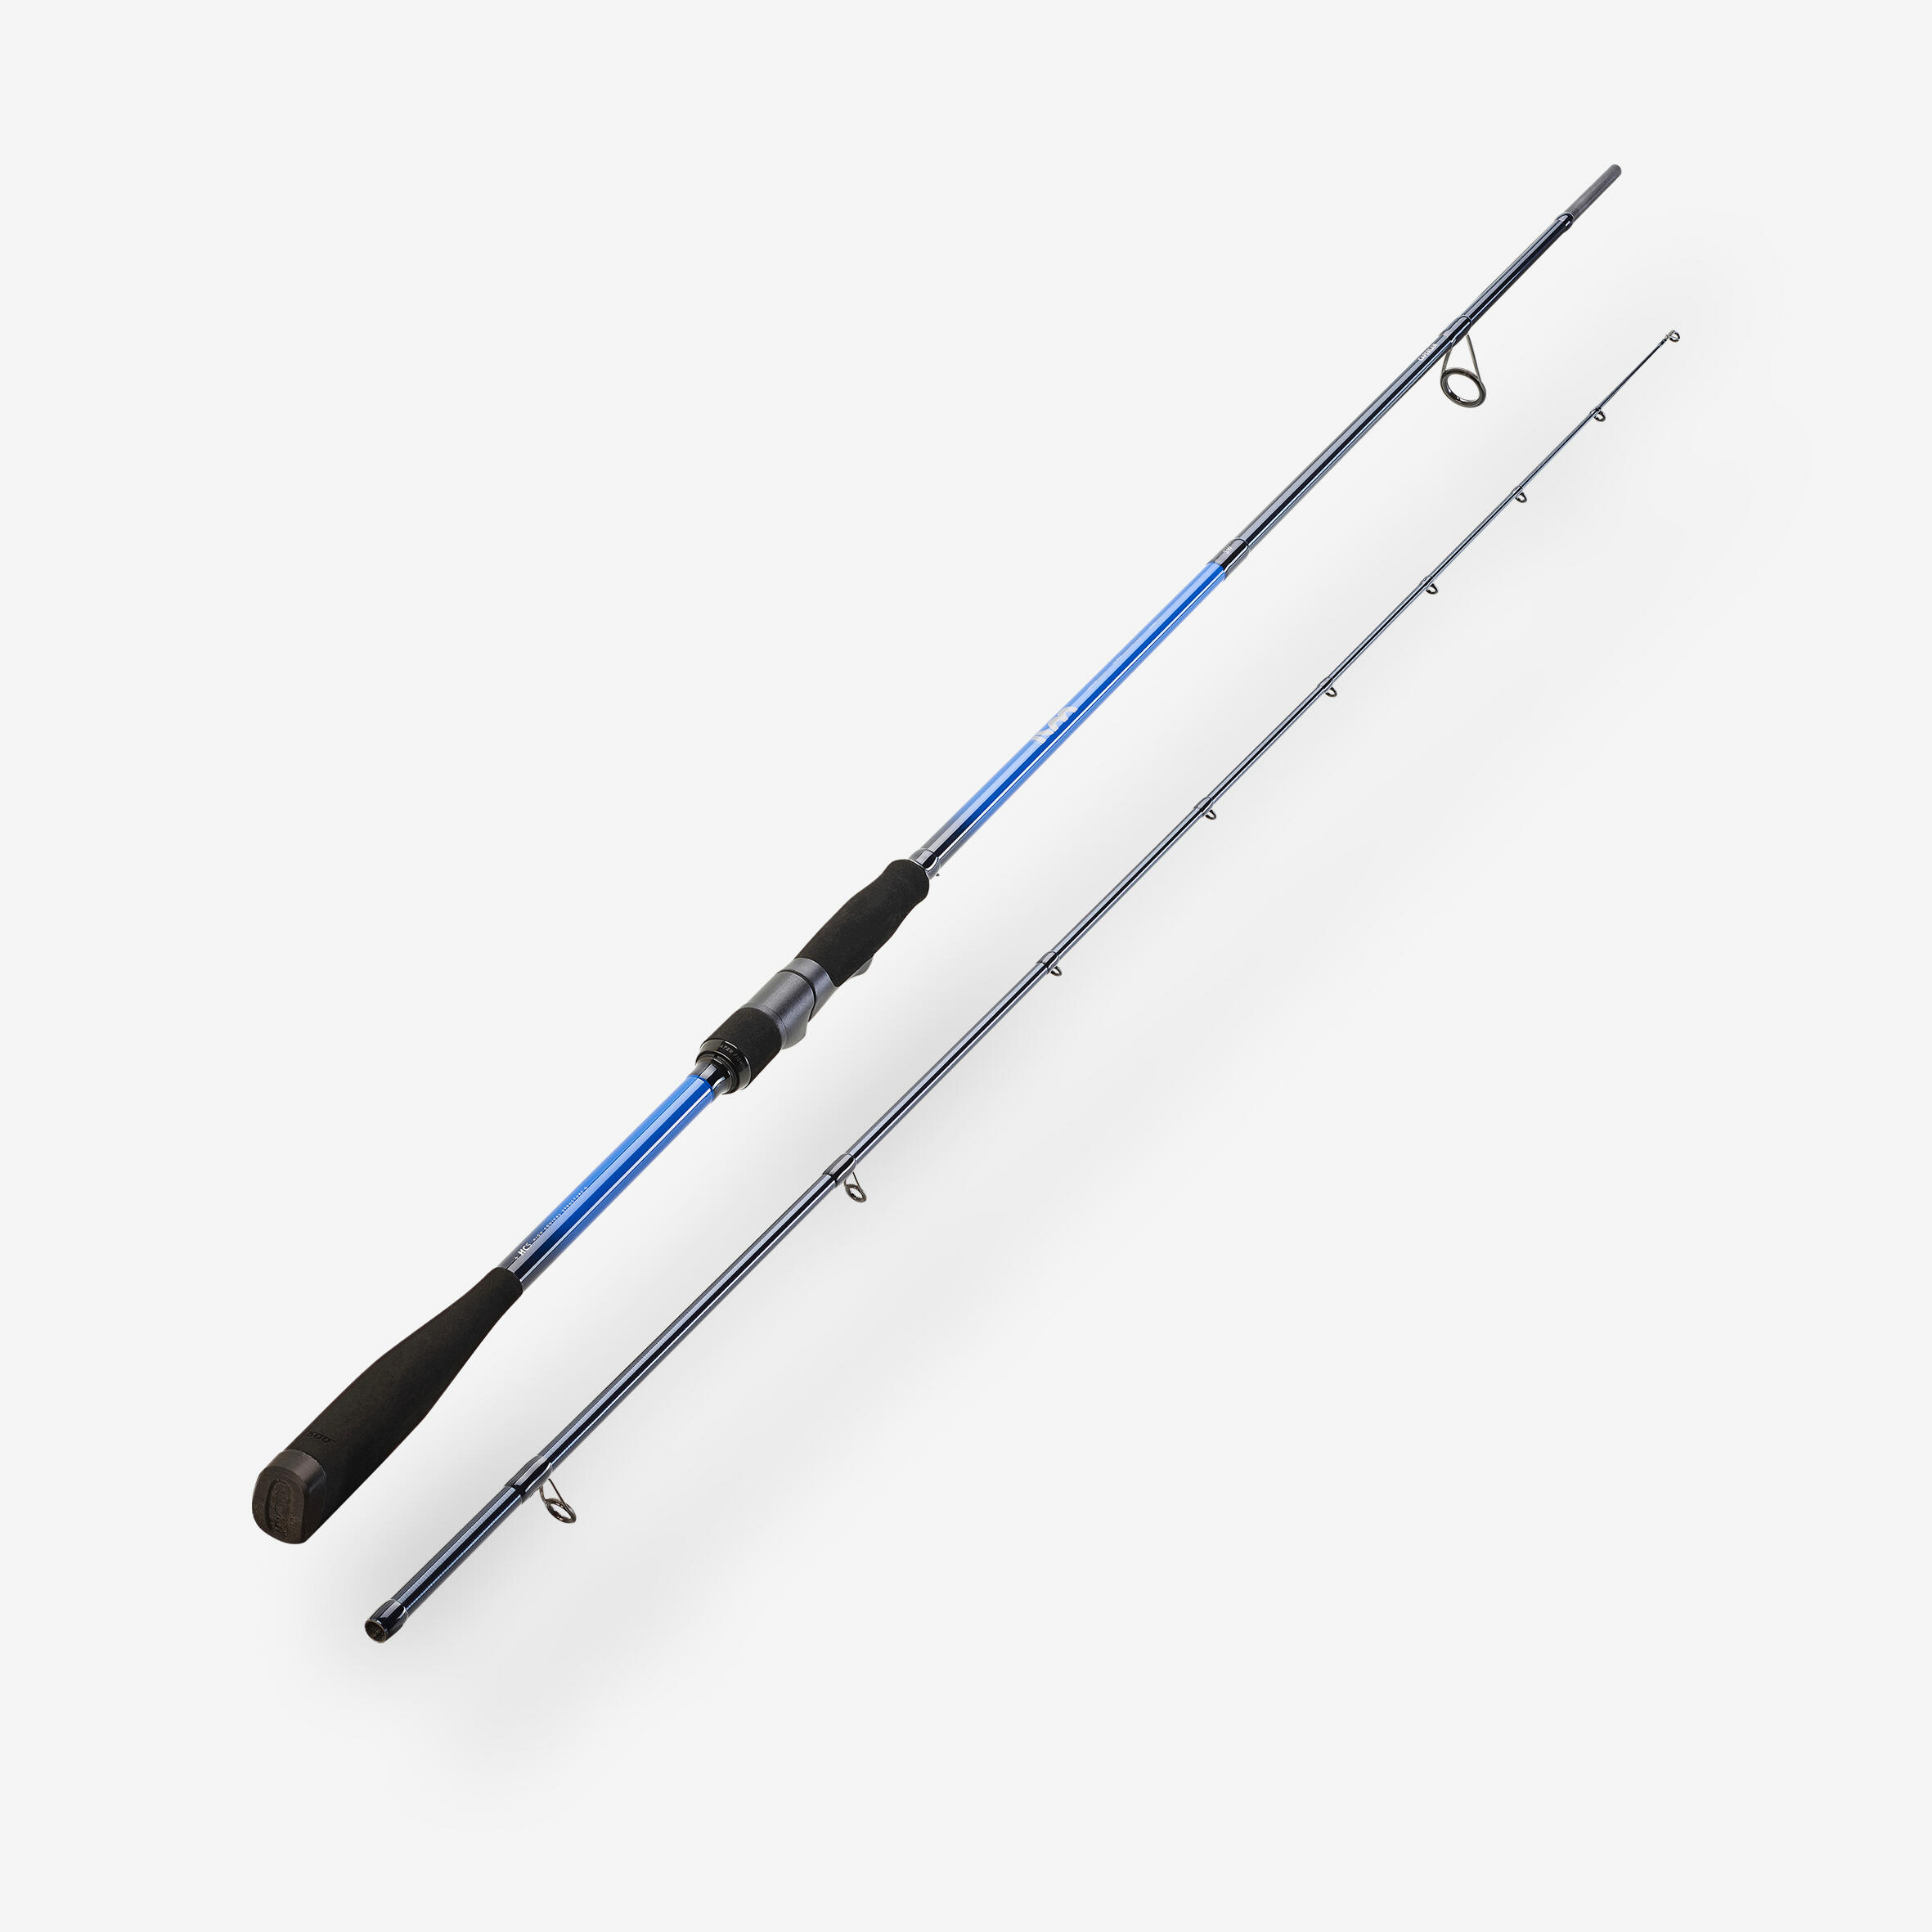 PRESS-FIT FISHING ROD HANDLE 5.5 M LENGTH FOR STILL FISHING